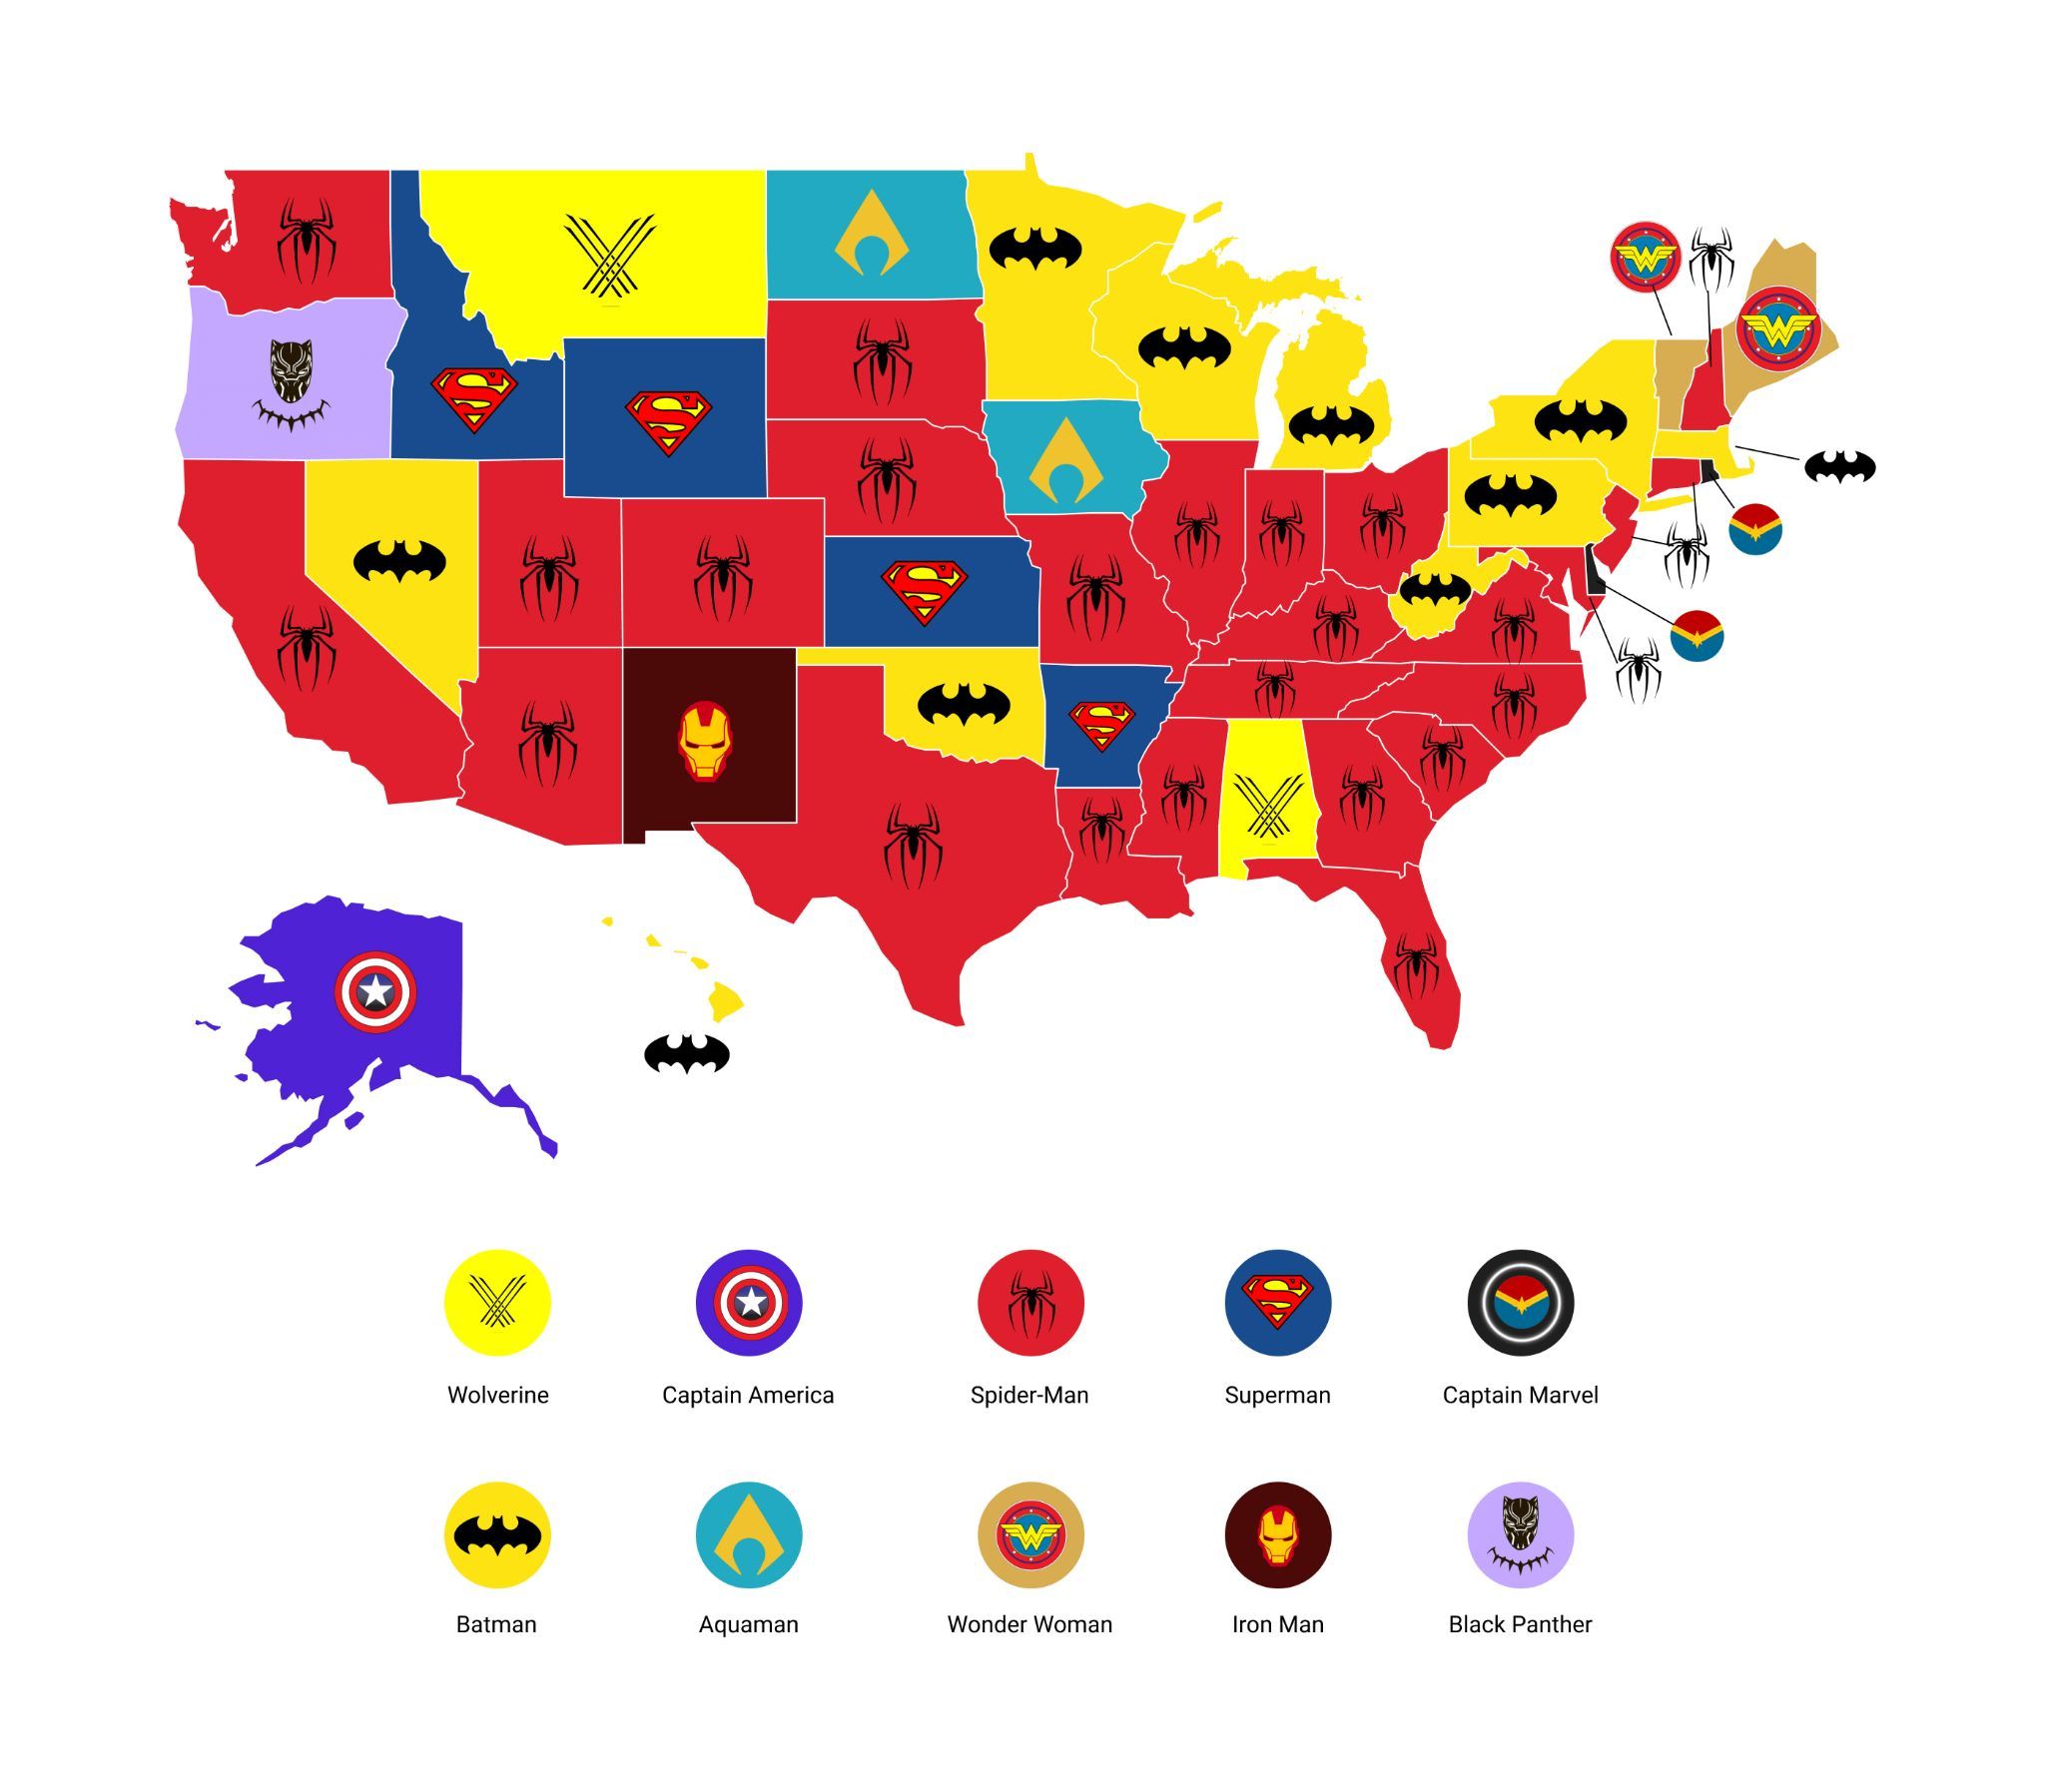 map of the U.S. and most popular comic book superiors by state